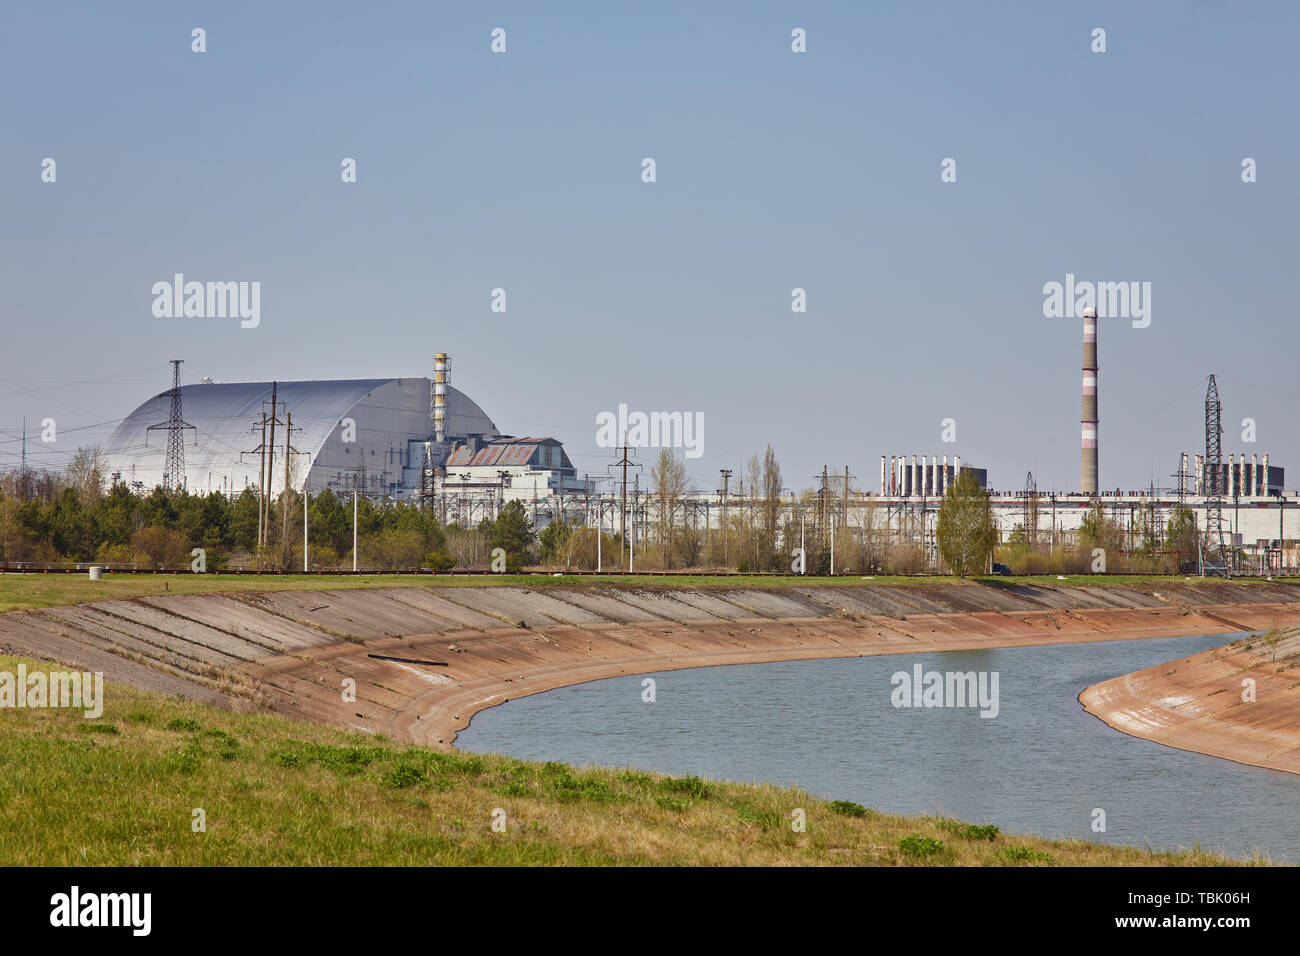 nuclear reactors of Chernobyl power plant next to Pripyat river, 4th (exploded) reactor with sarcophagus on left, 3th reactor on right, Exclusion zone Stock Photo